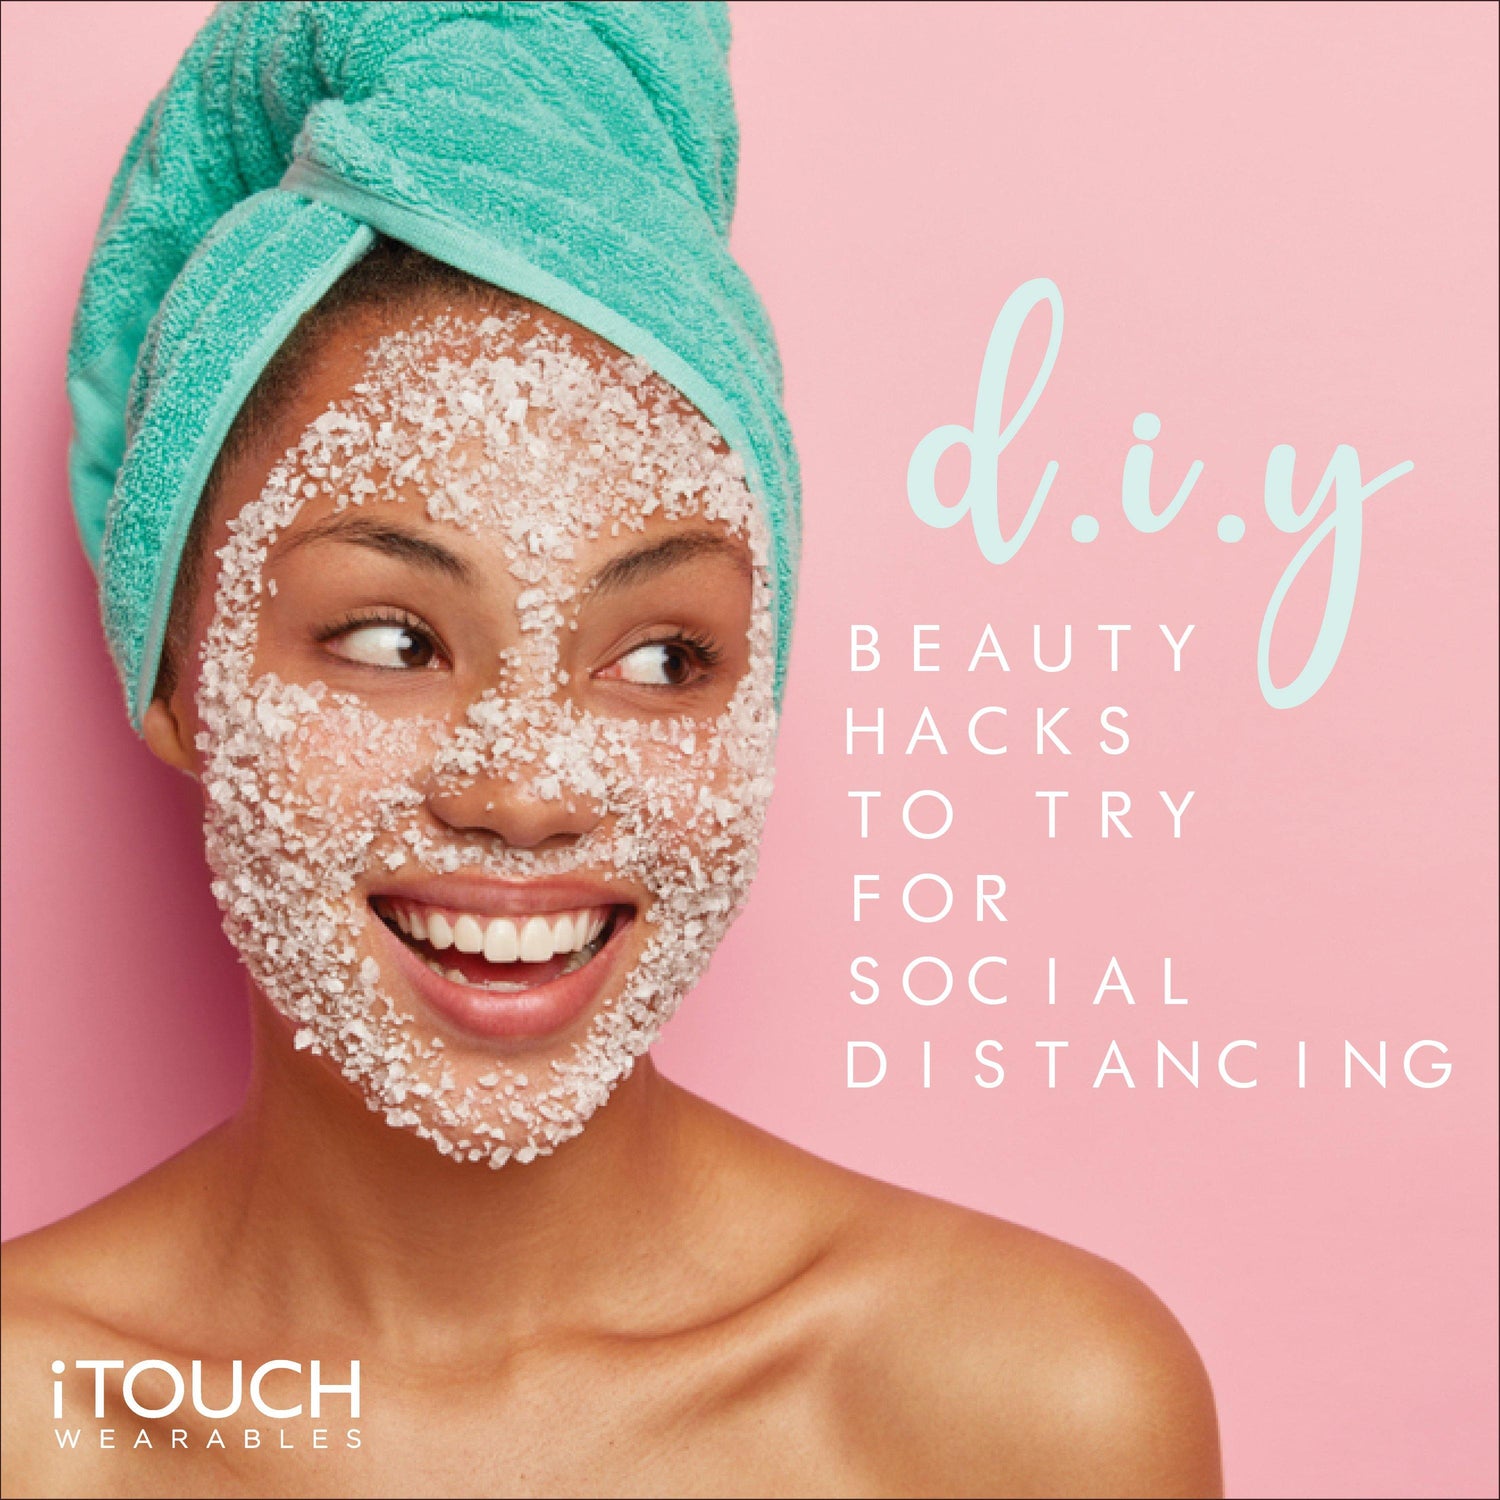 DIY Beauty Hacks To Try For Social Distancing - iTOUCH Wearables